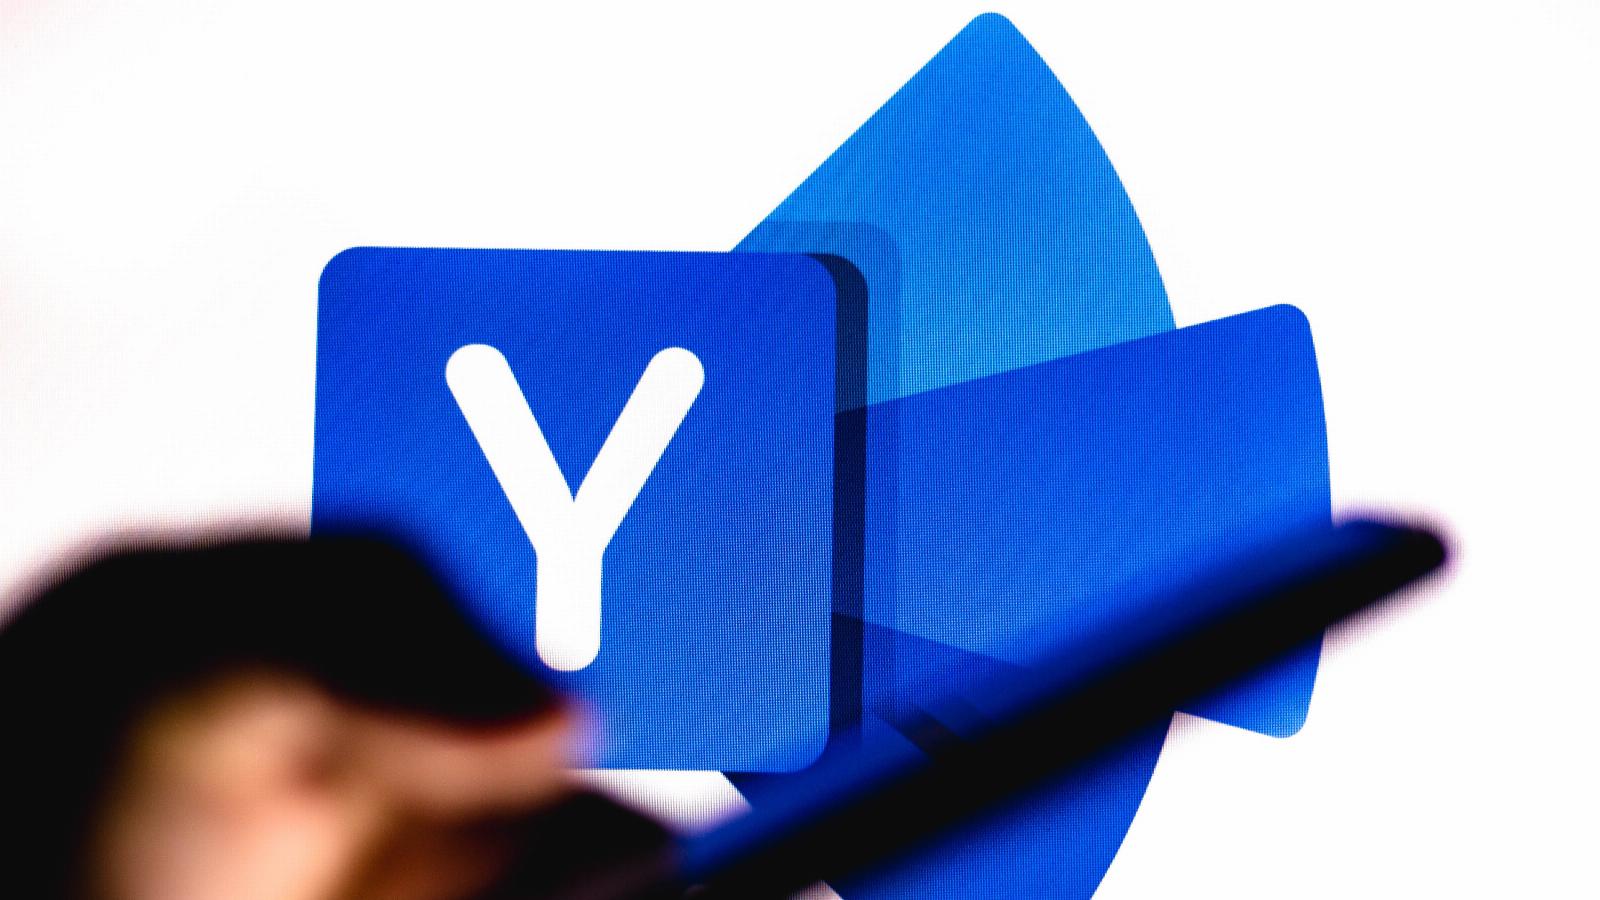 Microsoft ditches Yammer brand and goes all-in on Viva Engage